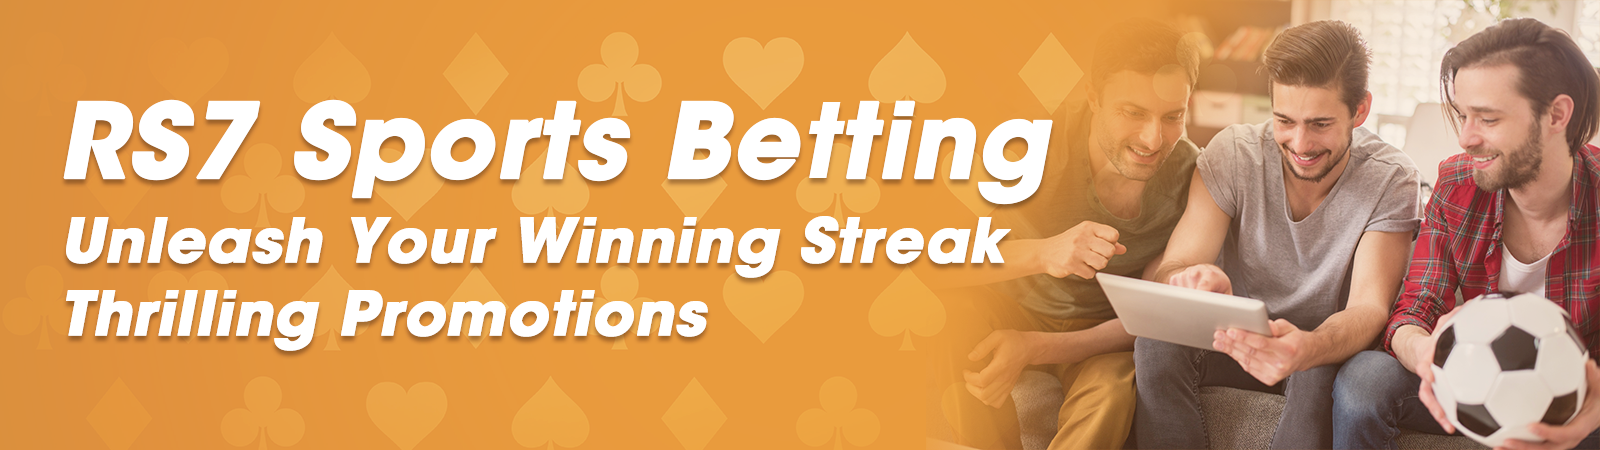 RS7 Sports Betting | Unleash Your Winning Streak Thrilling Promotions